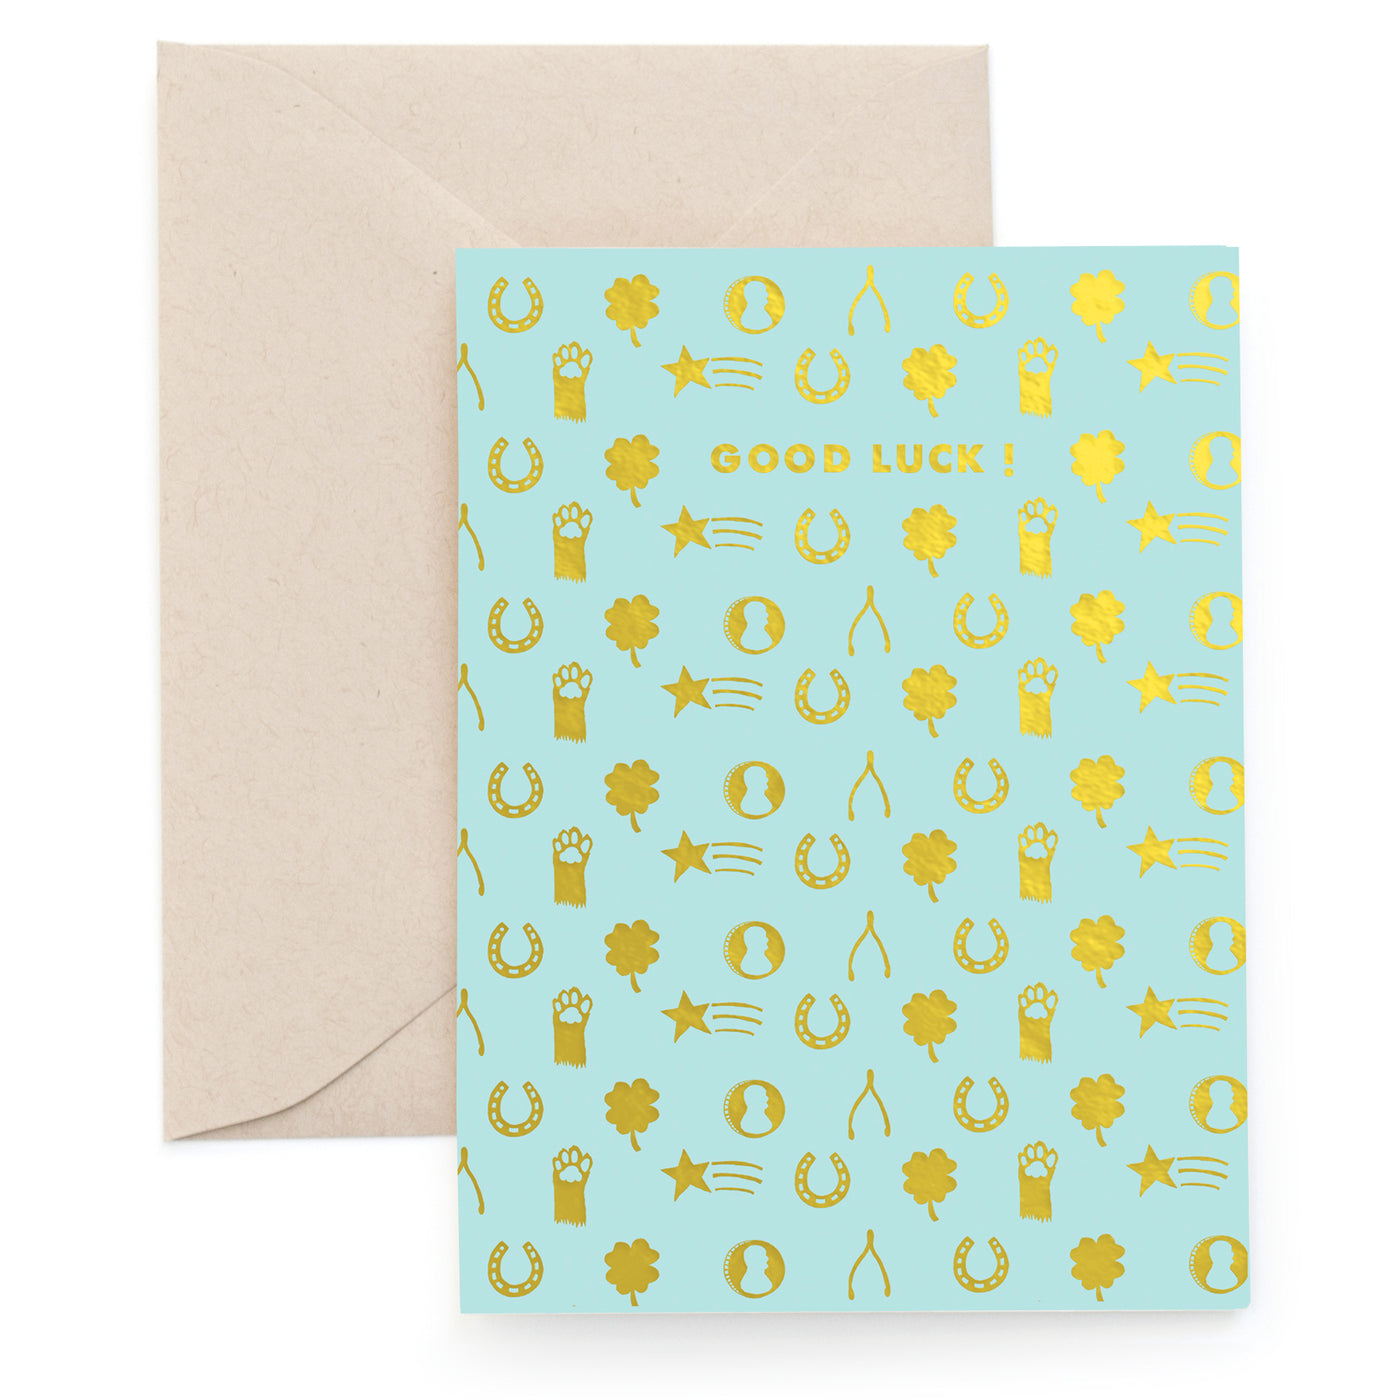 BEST OF LUCK - Everyday Greeting Card